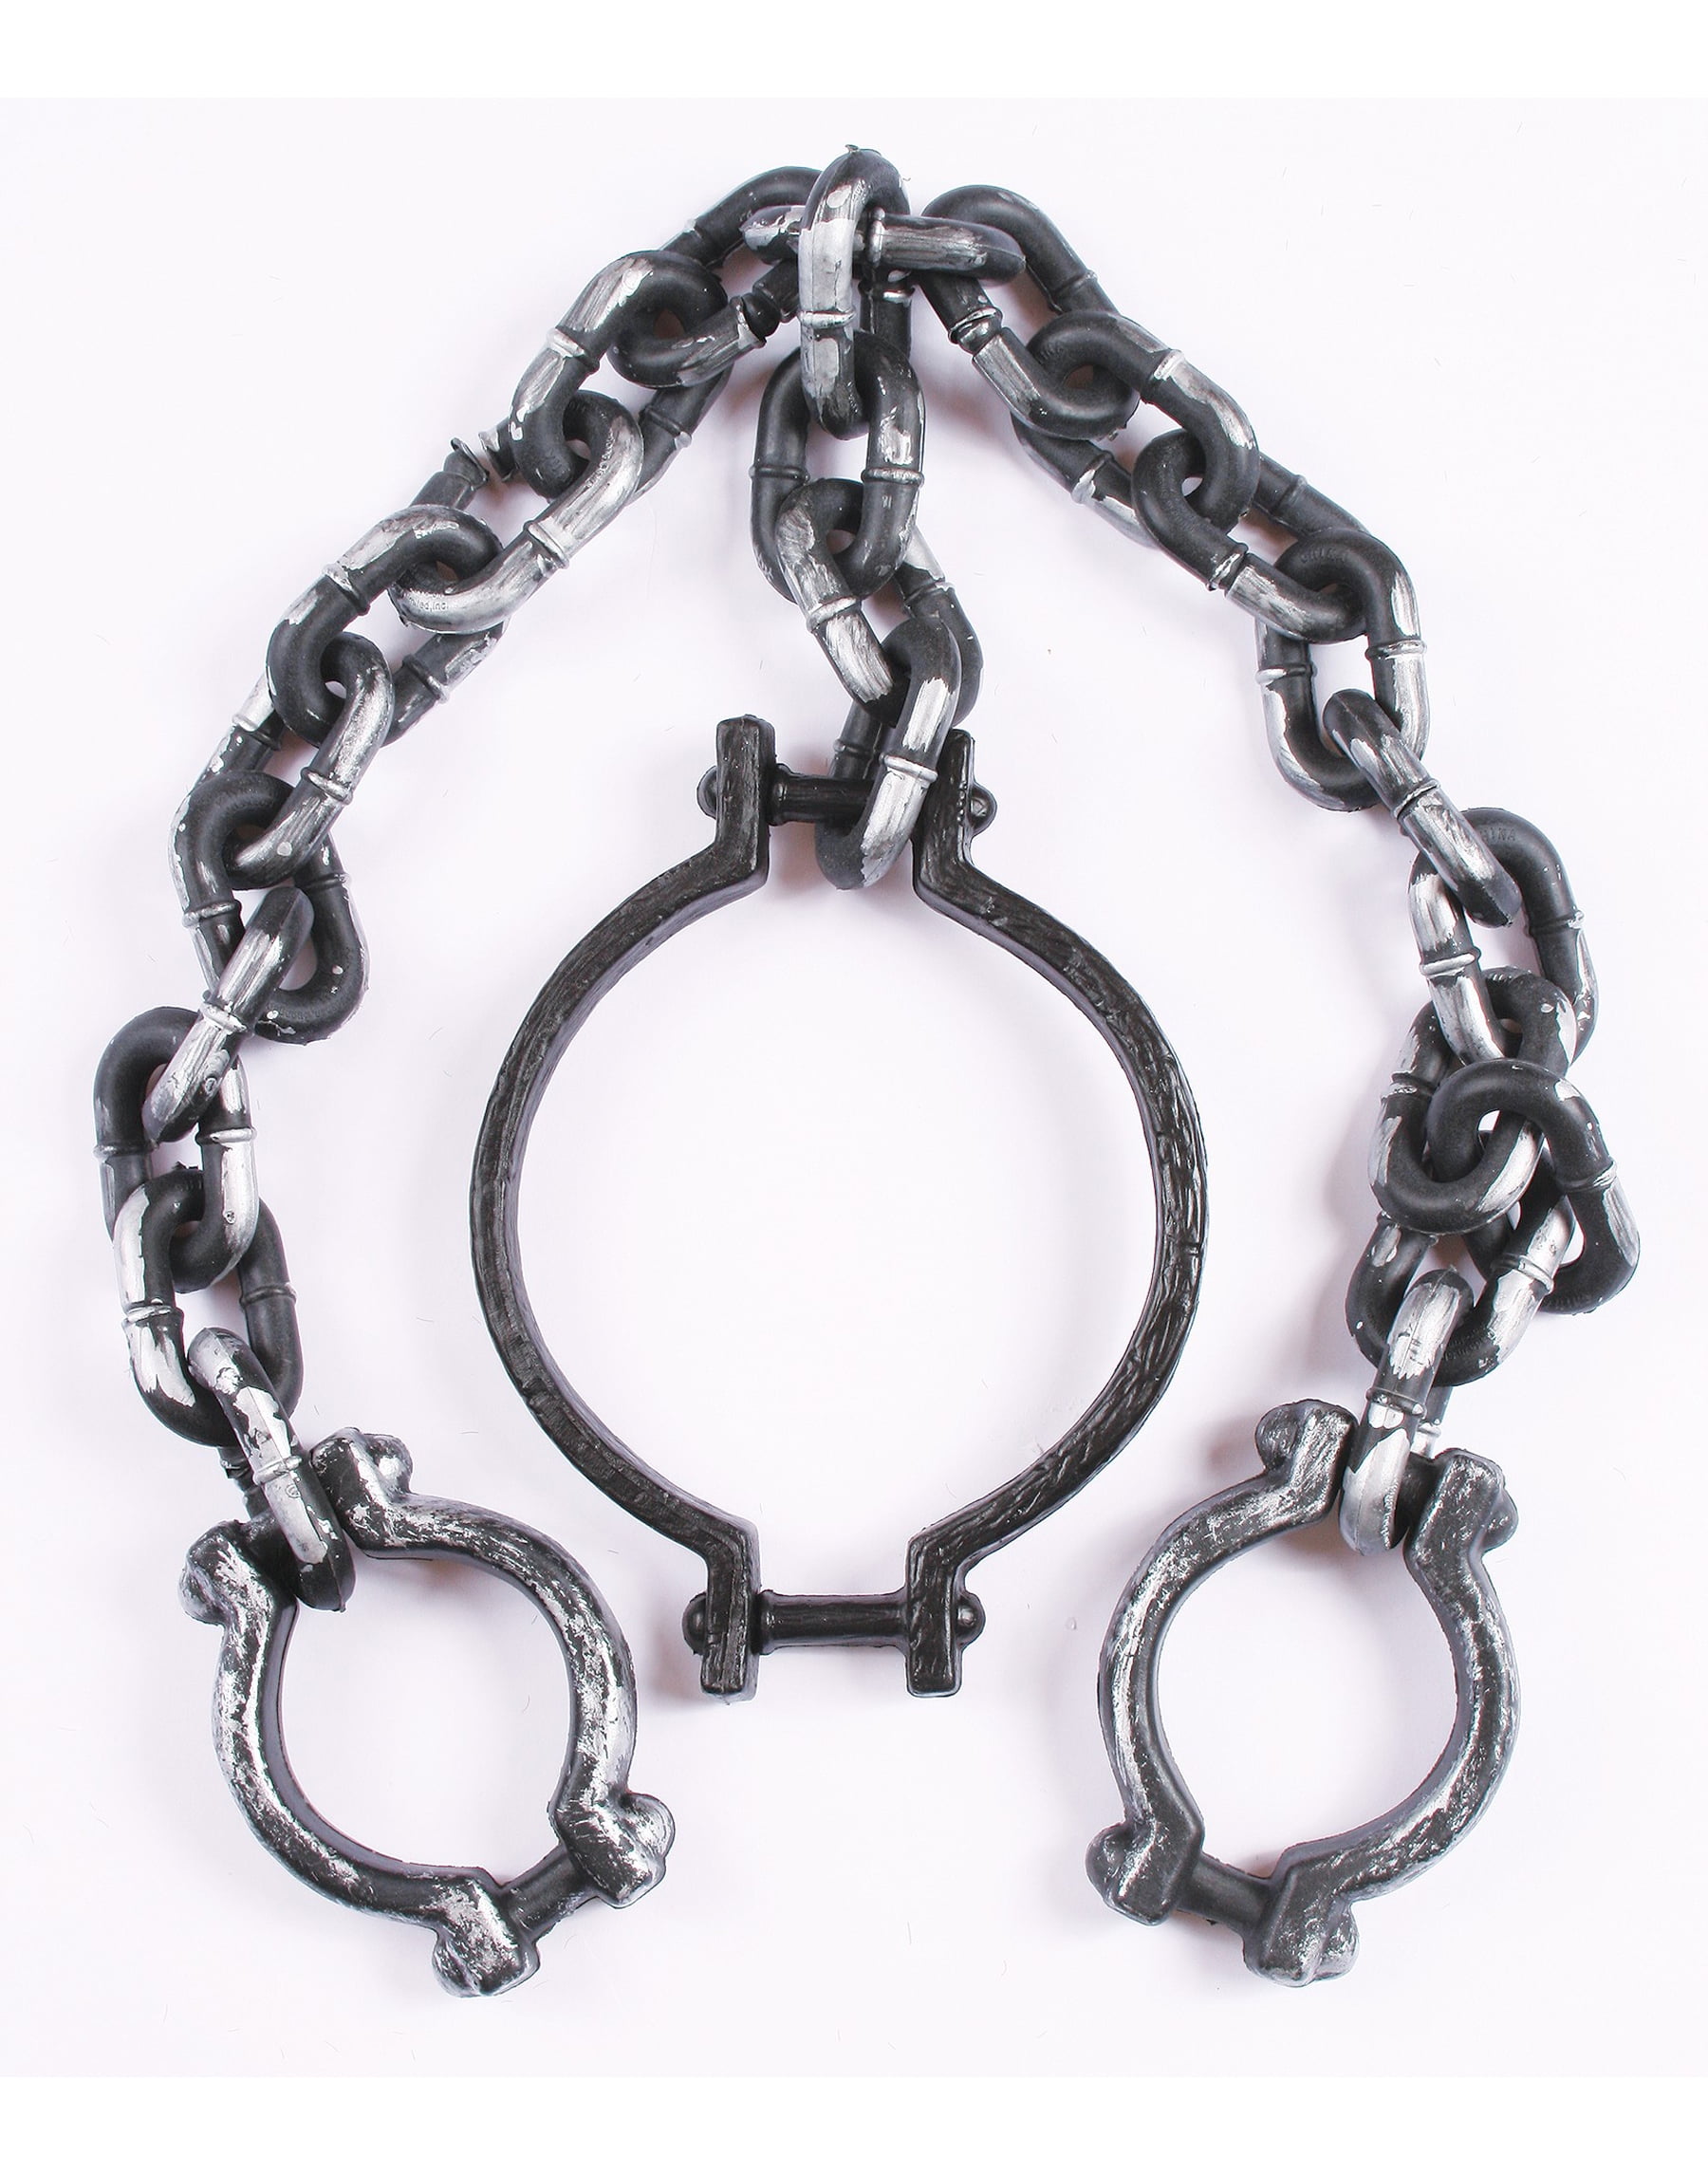 Neck and Hands Shackles Prisoner Chains Ball & Chain Fancy Dress Party Accessory 